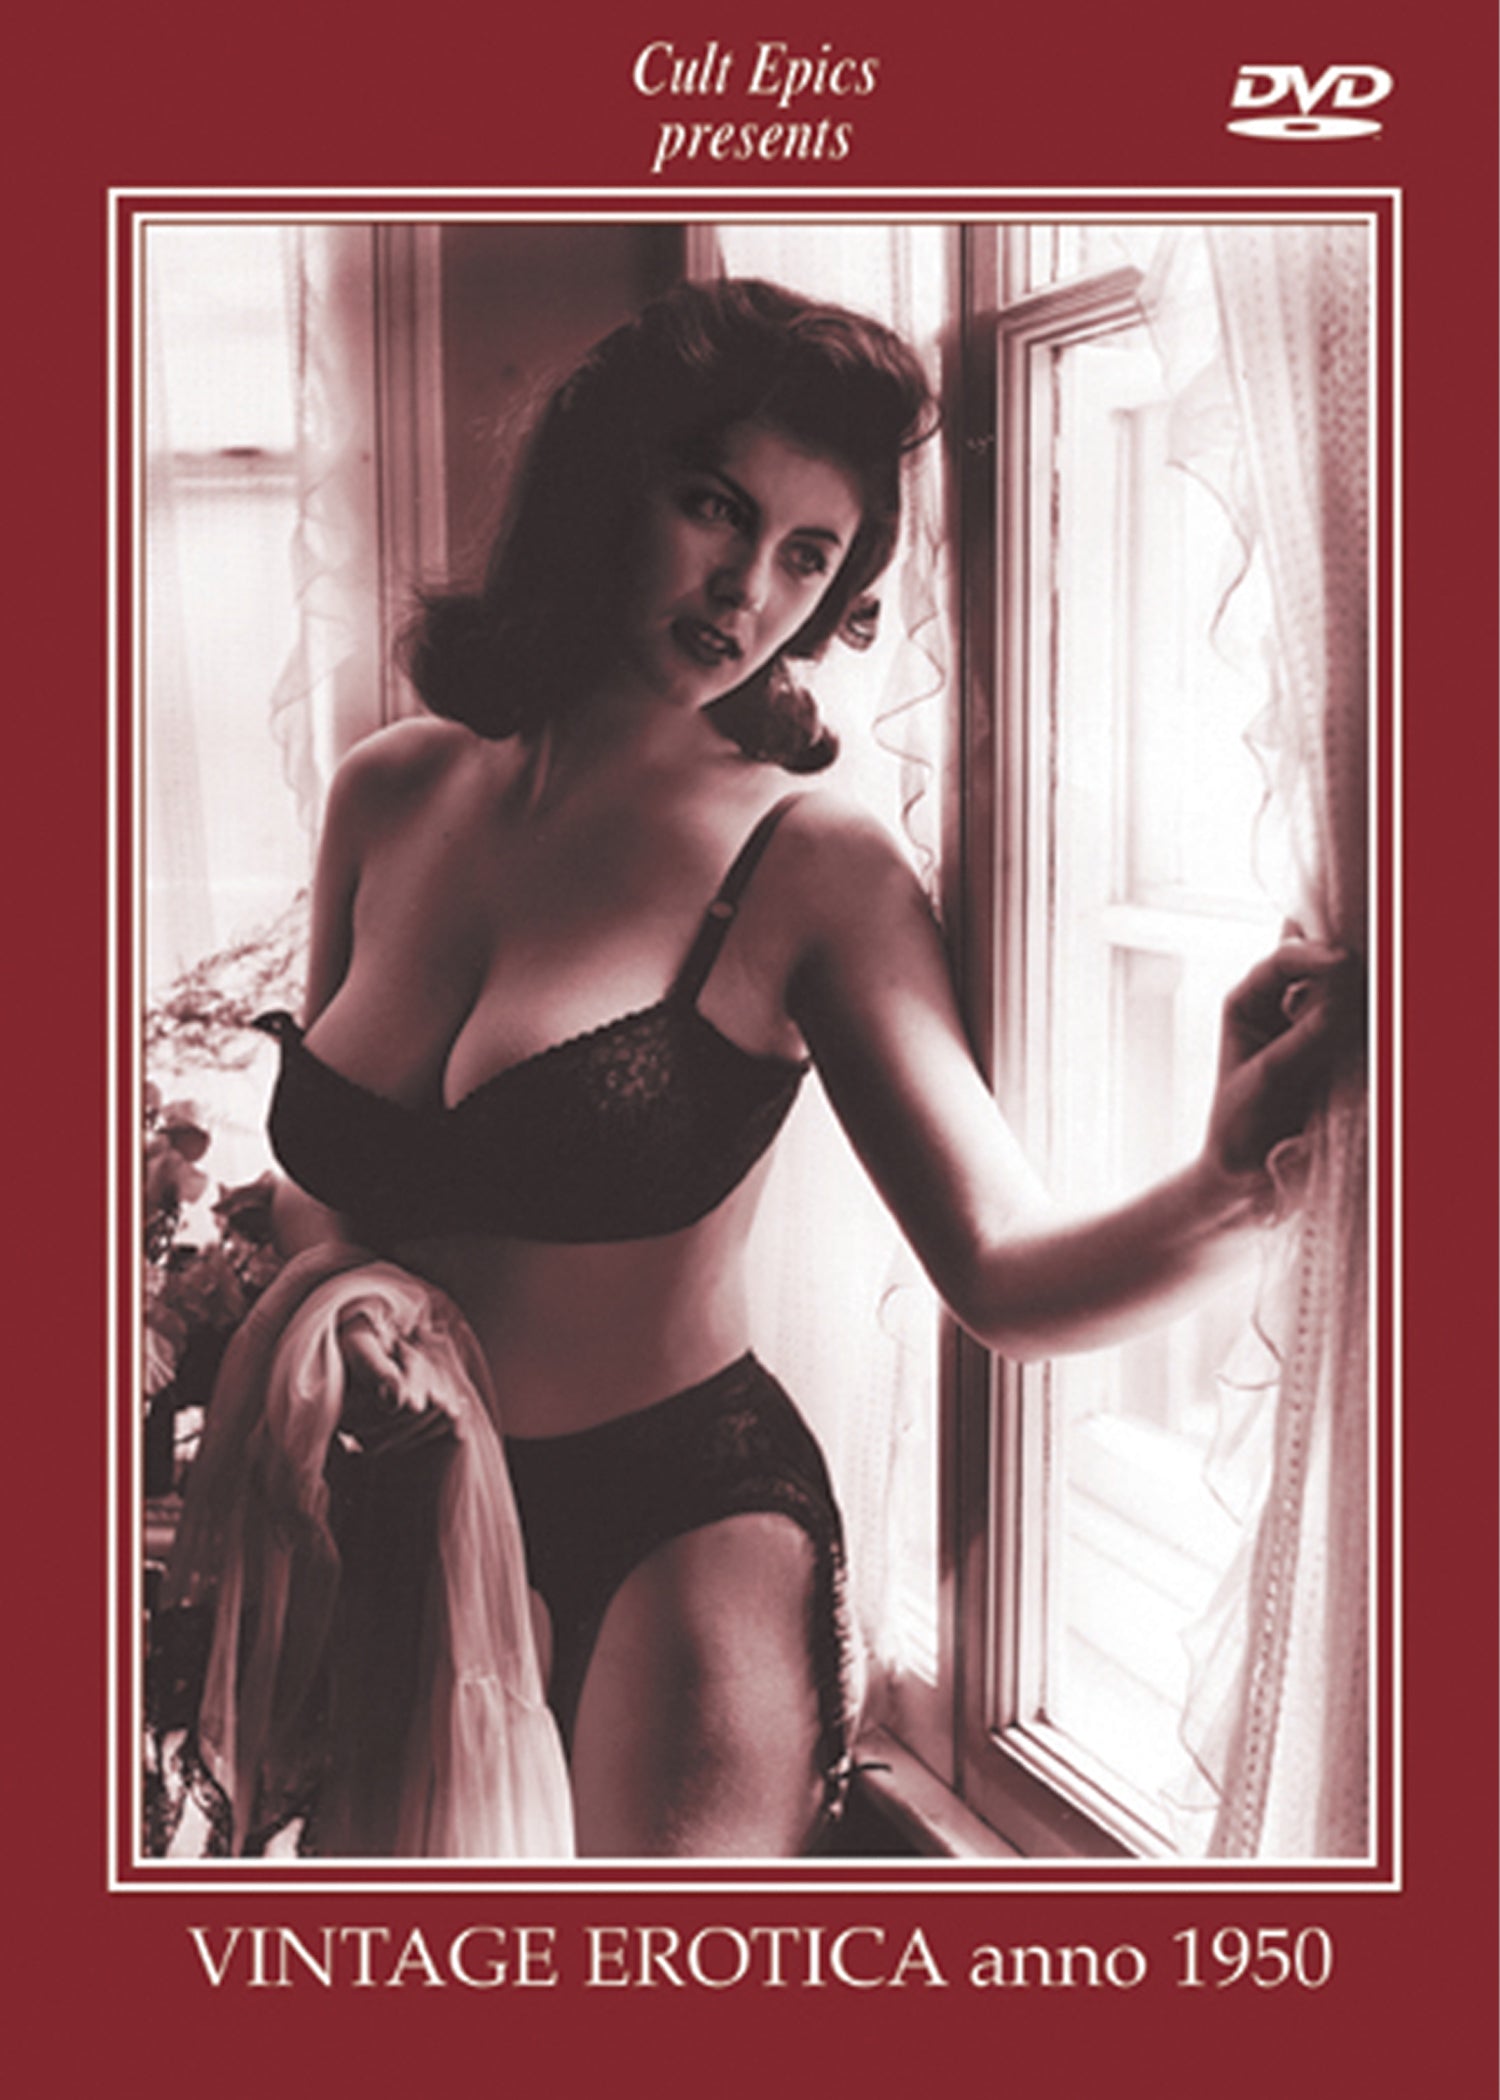 THE VINTAGE EROTICA COLLECTION 1930-1950 DVD